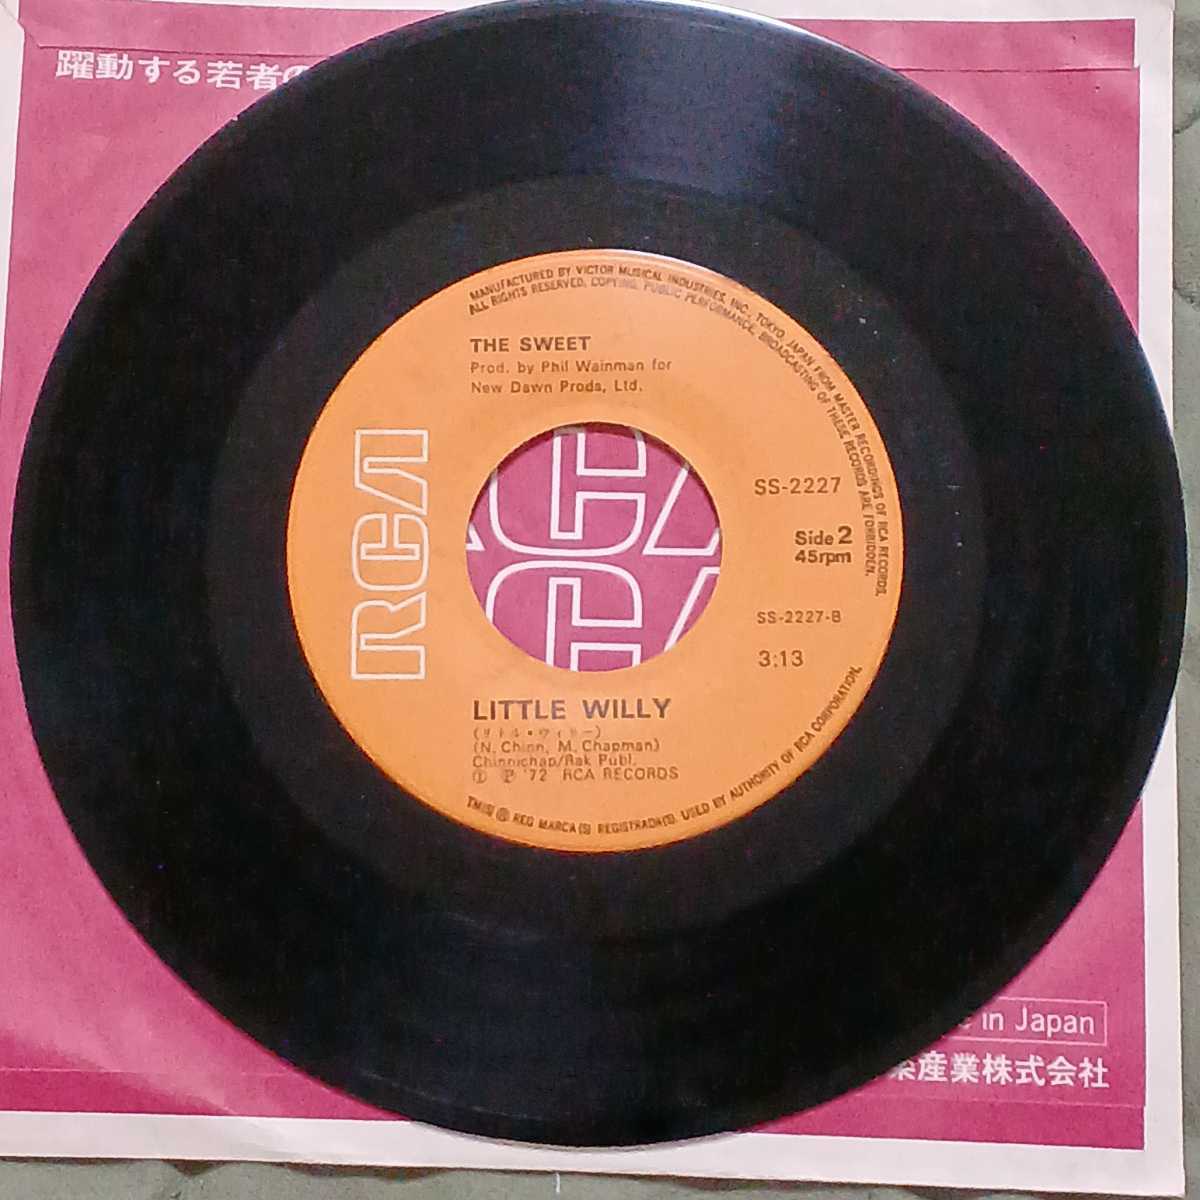  mega rare * domestic record 7inch Single*The Sweet / The * sweet *1972 year <wig* one *bam/ Wig Wam Bam* little * Willie / Little Willy>